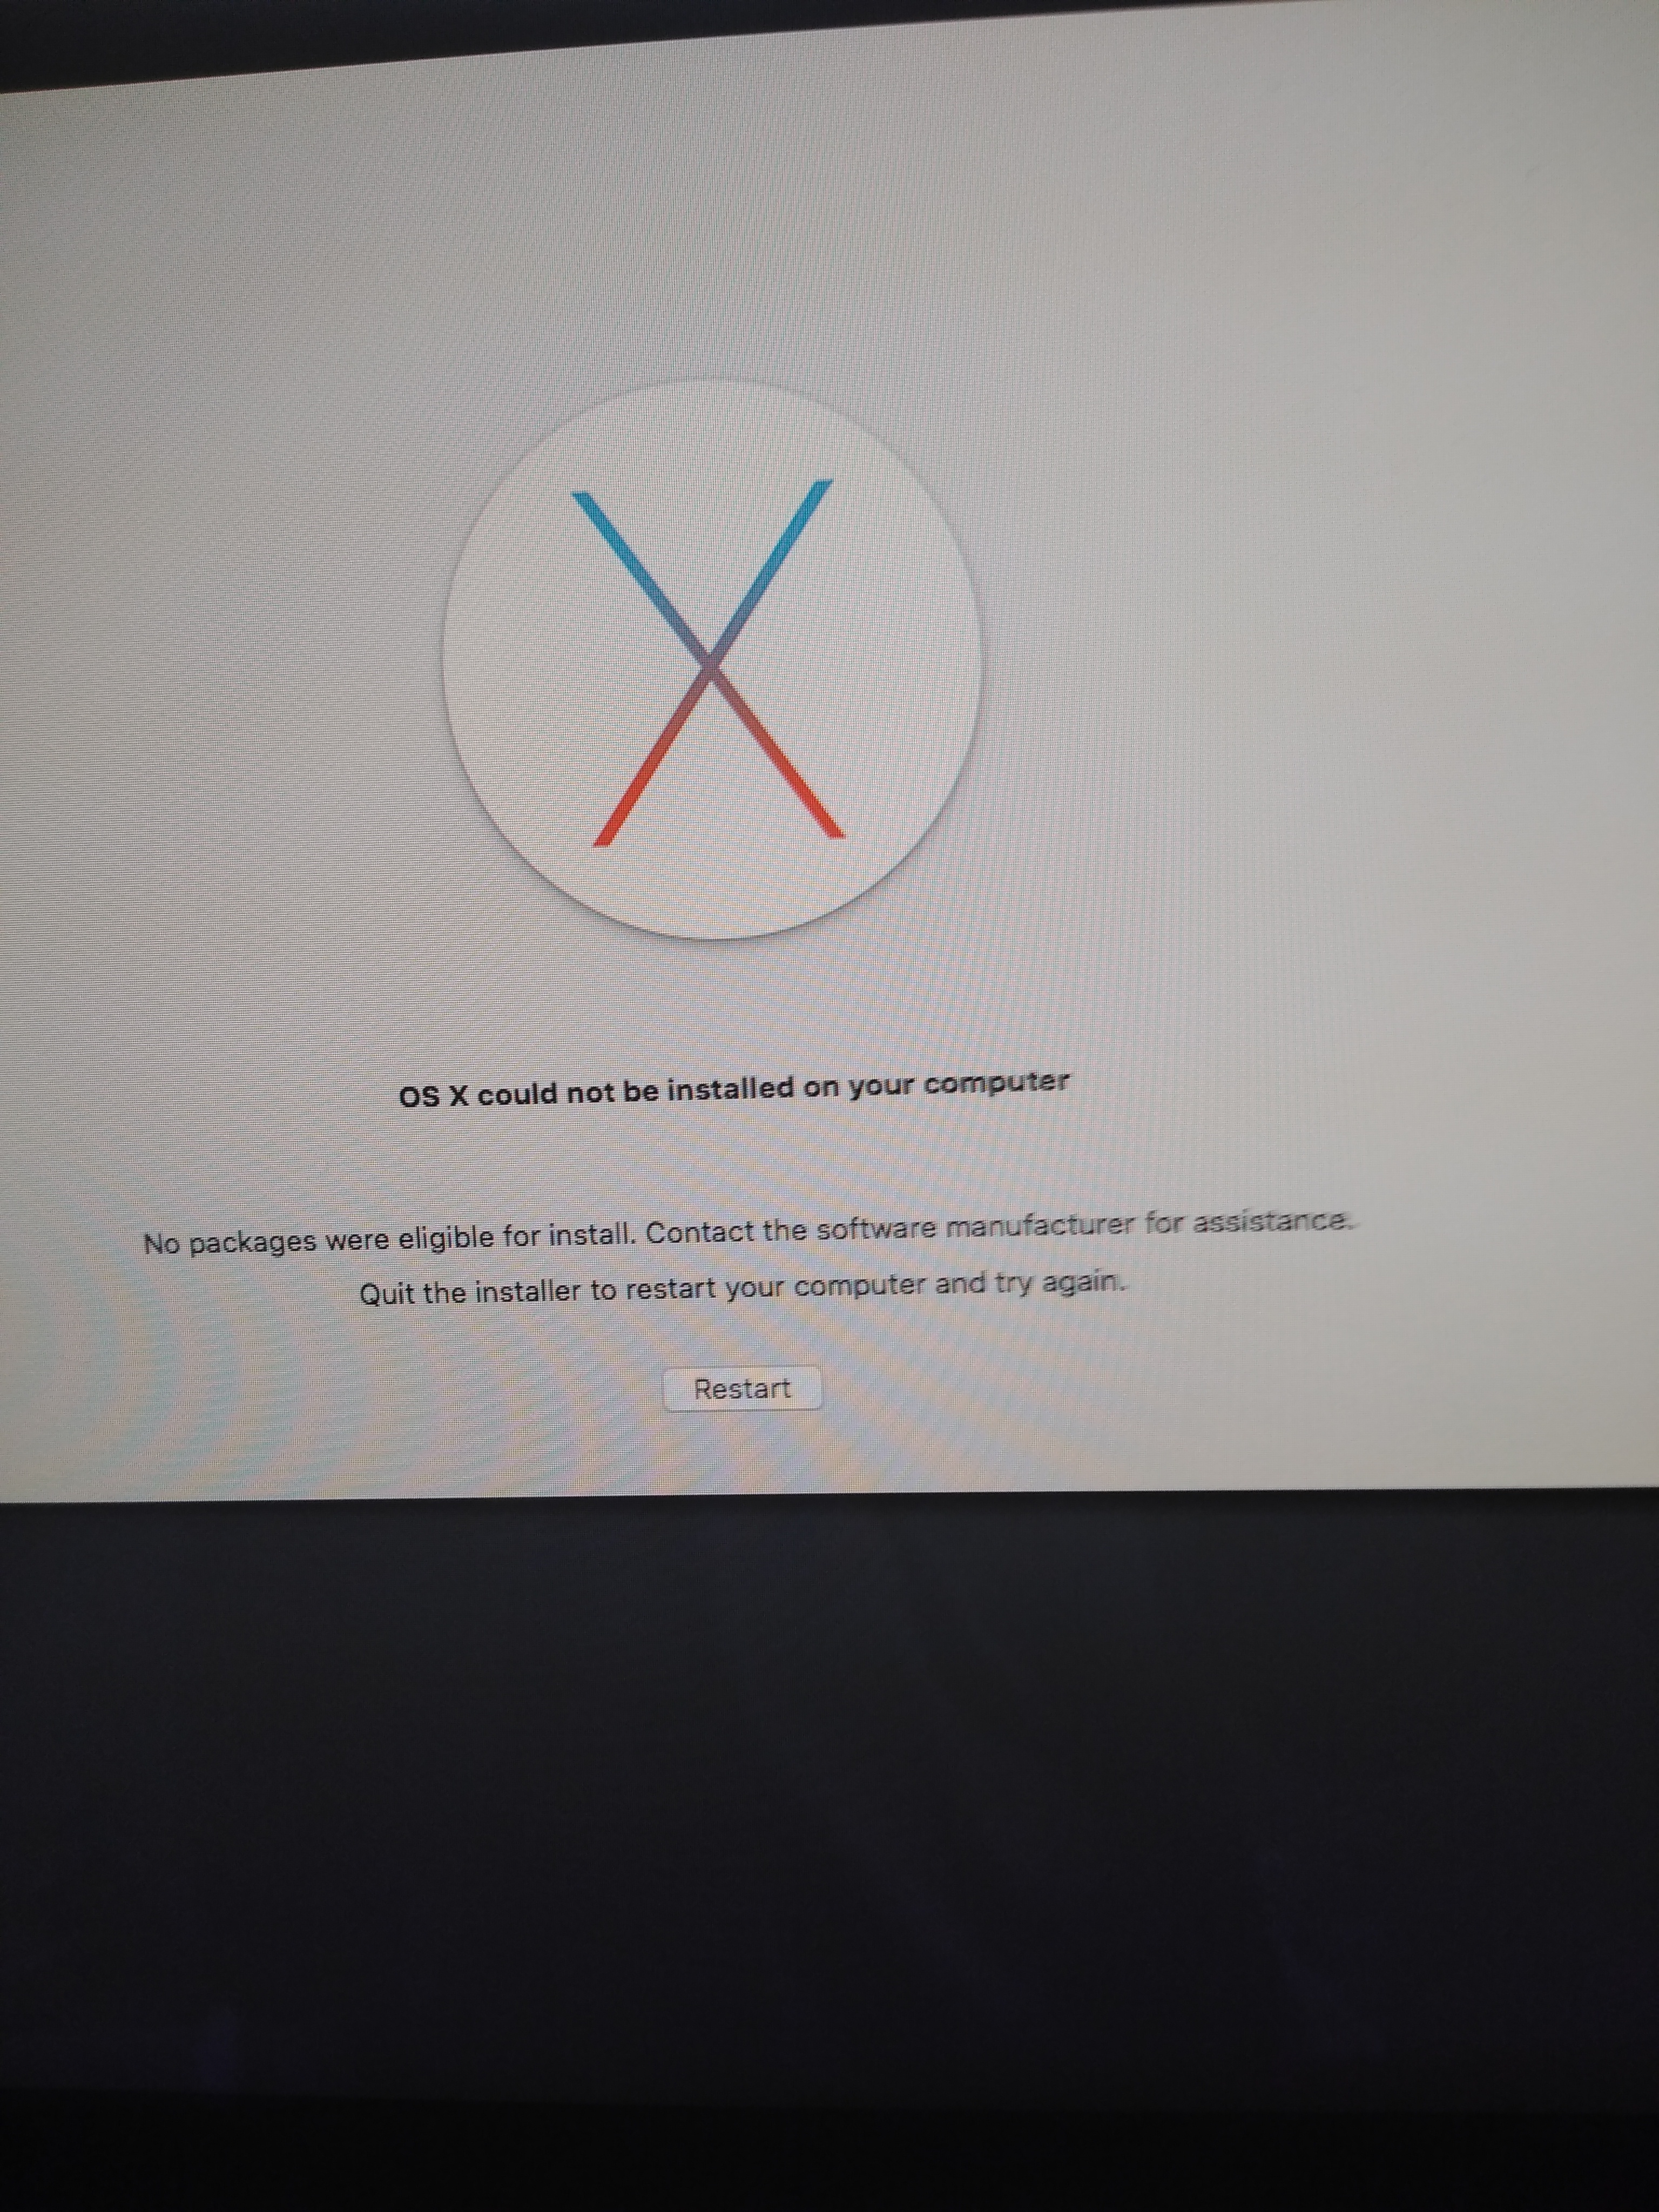 No packages were eligible for install macbook pro